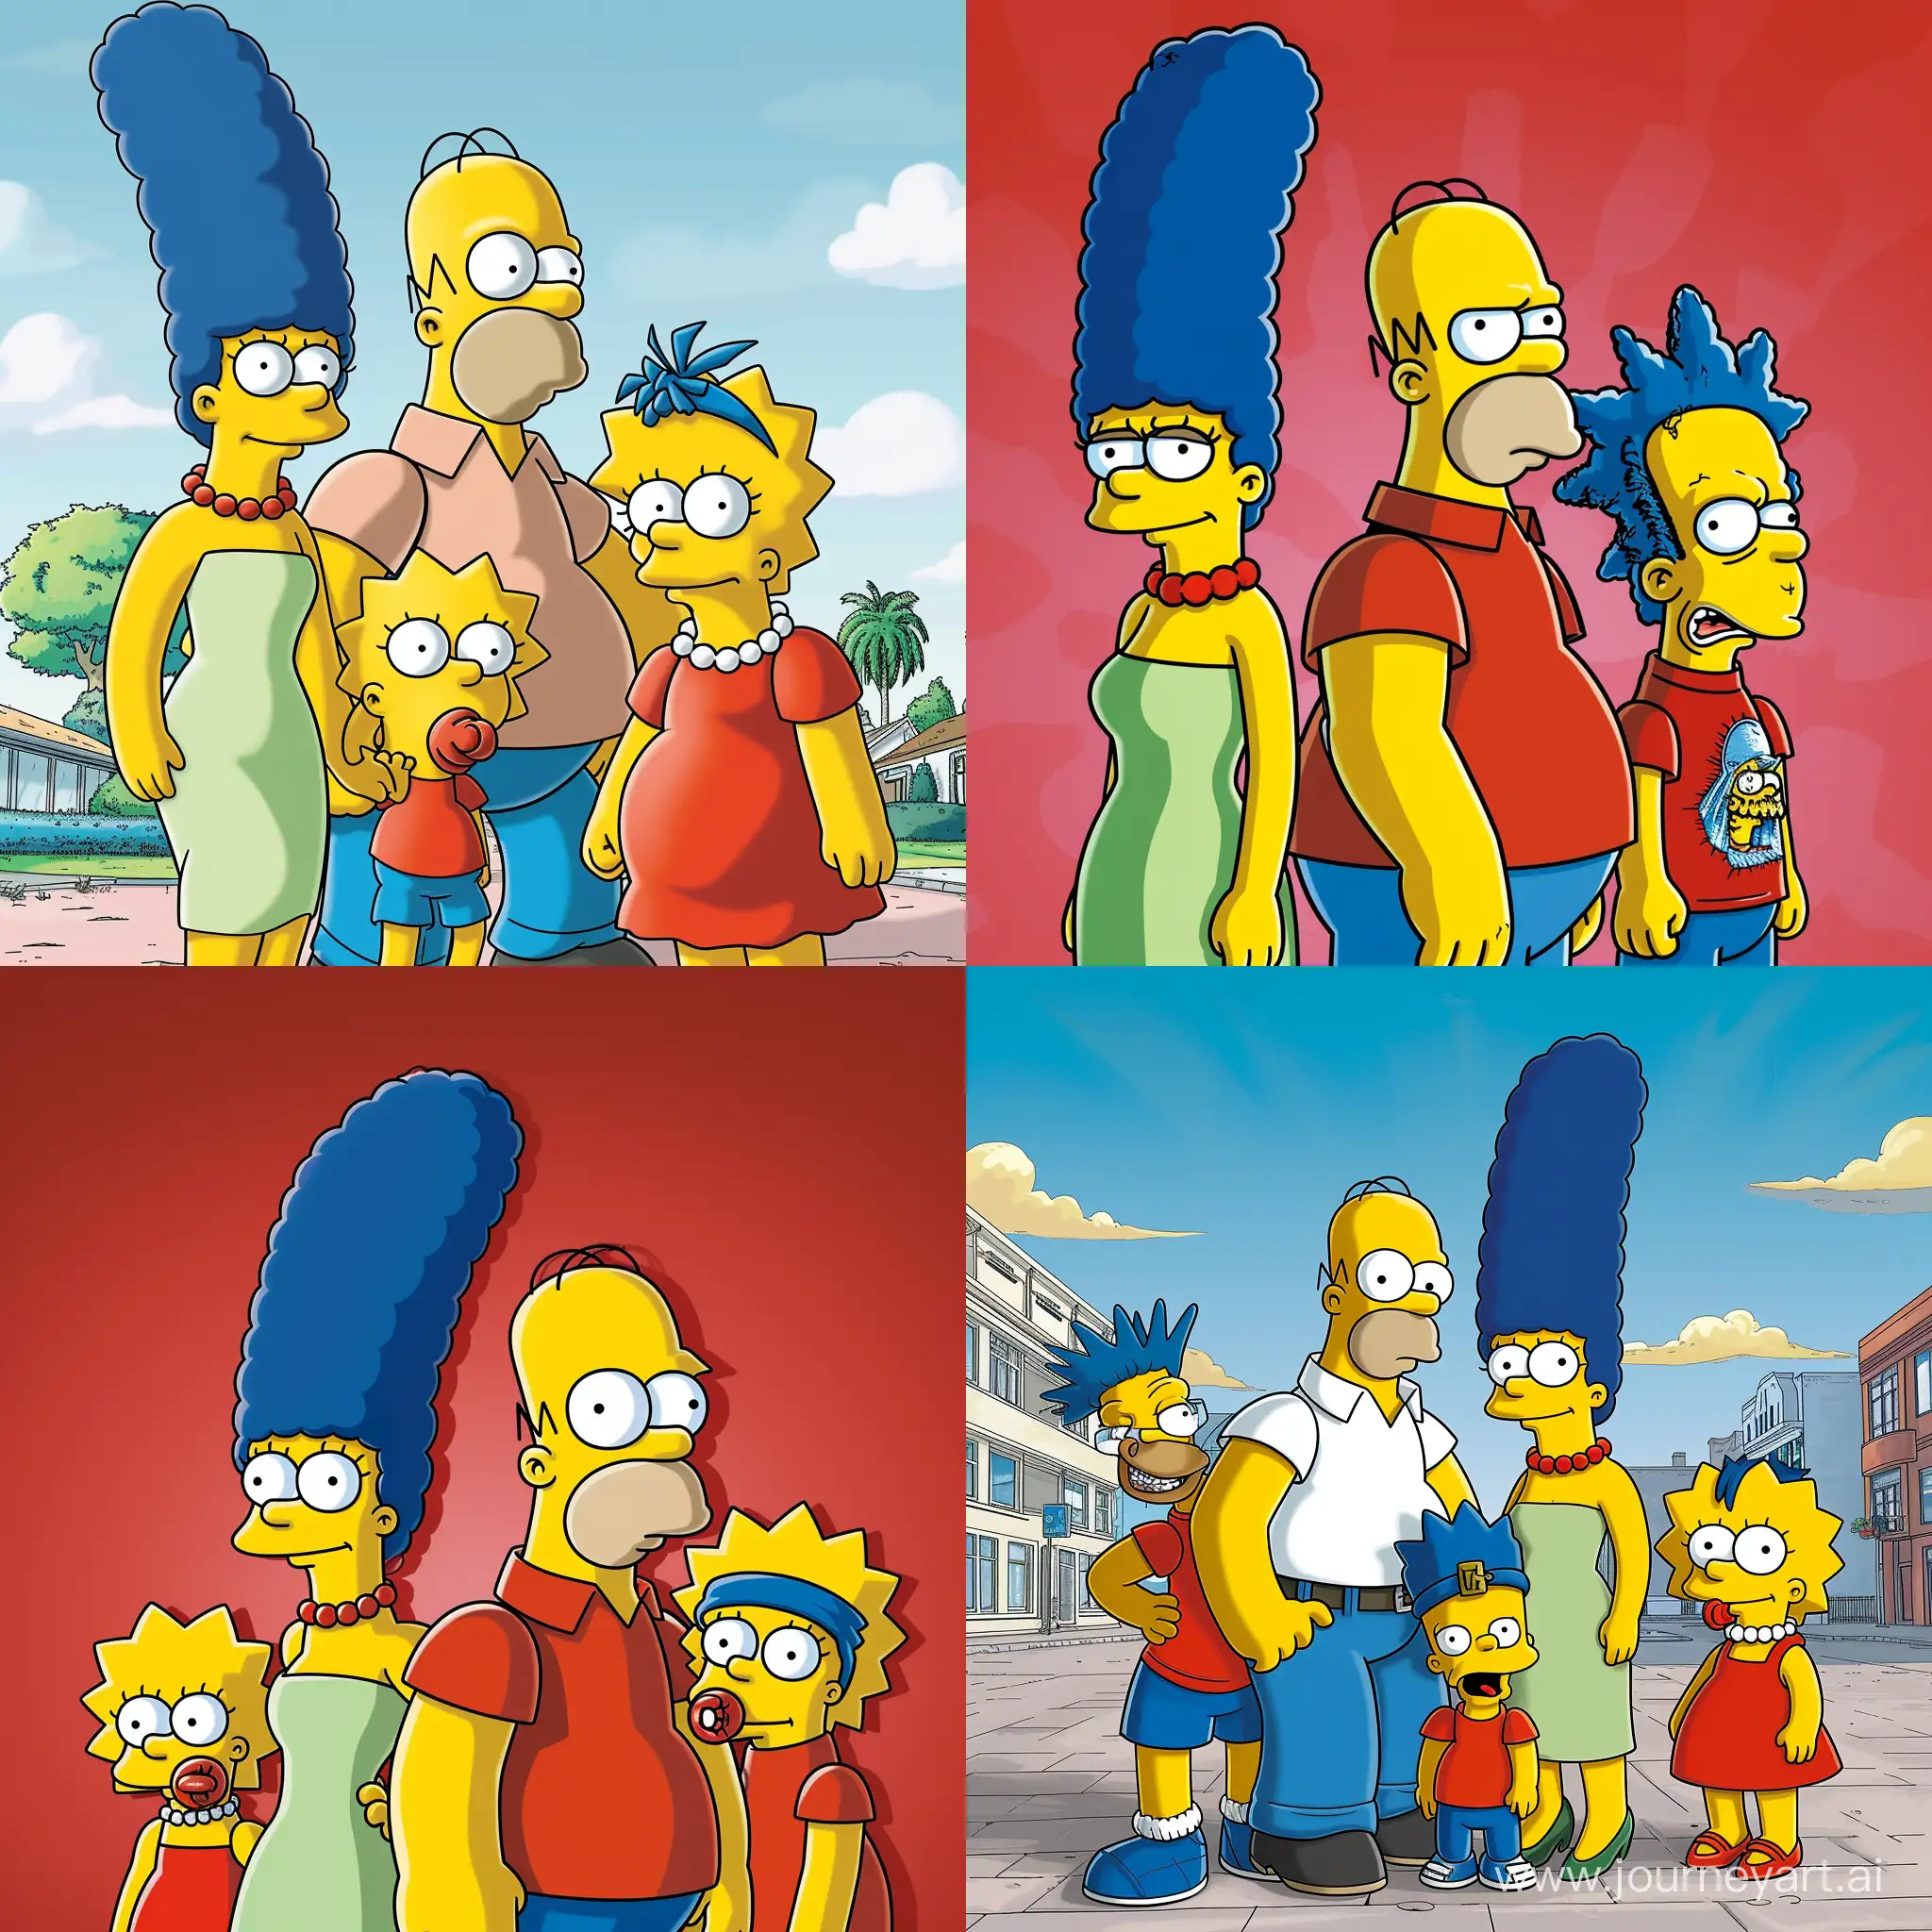 Homer Simpson: Portrayed as a middle-aged man, slightly overweight, with a friendly but clumsy demeanor. Marge Simpson: A tall woman with a distinctive blue beehive hairstyle, wearing a green dress. Bart Simpson: A boy with spikey hair, wearing a red t-shirt and blue shorts, with a mischievous expression. Lisa Simpson: A girl with a red dress and a blue headband, intelligent and serious in expression. Mr. Burns: An elderly man, thin, with a prominent nose and an expression of cunning and greed.